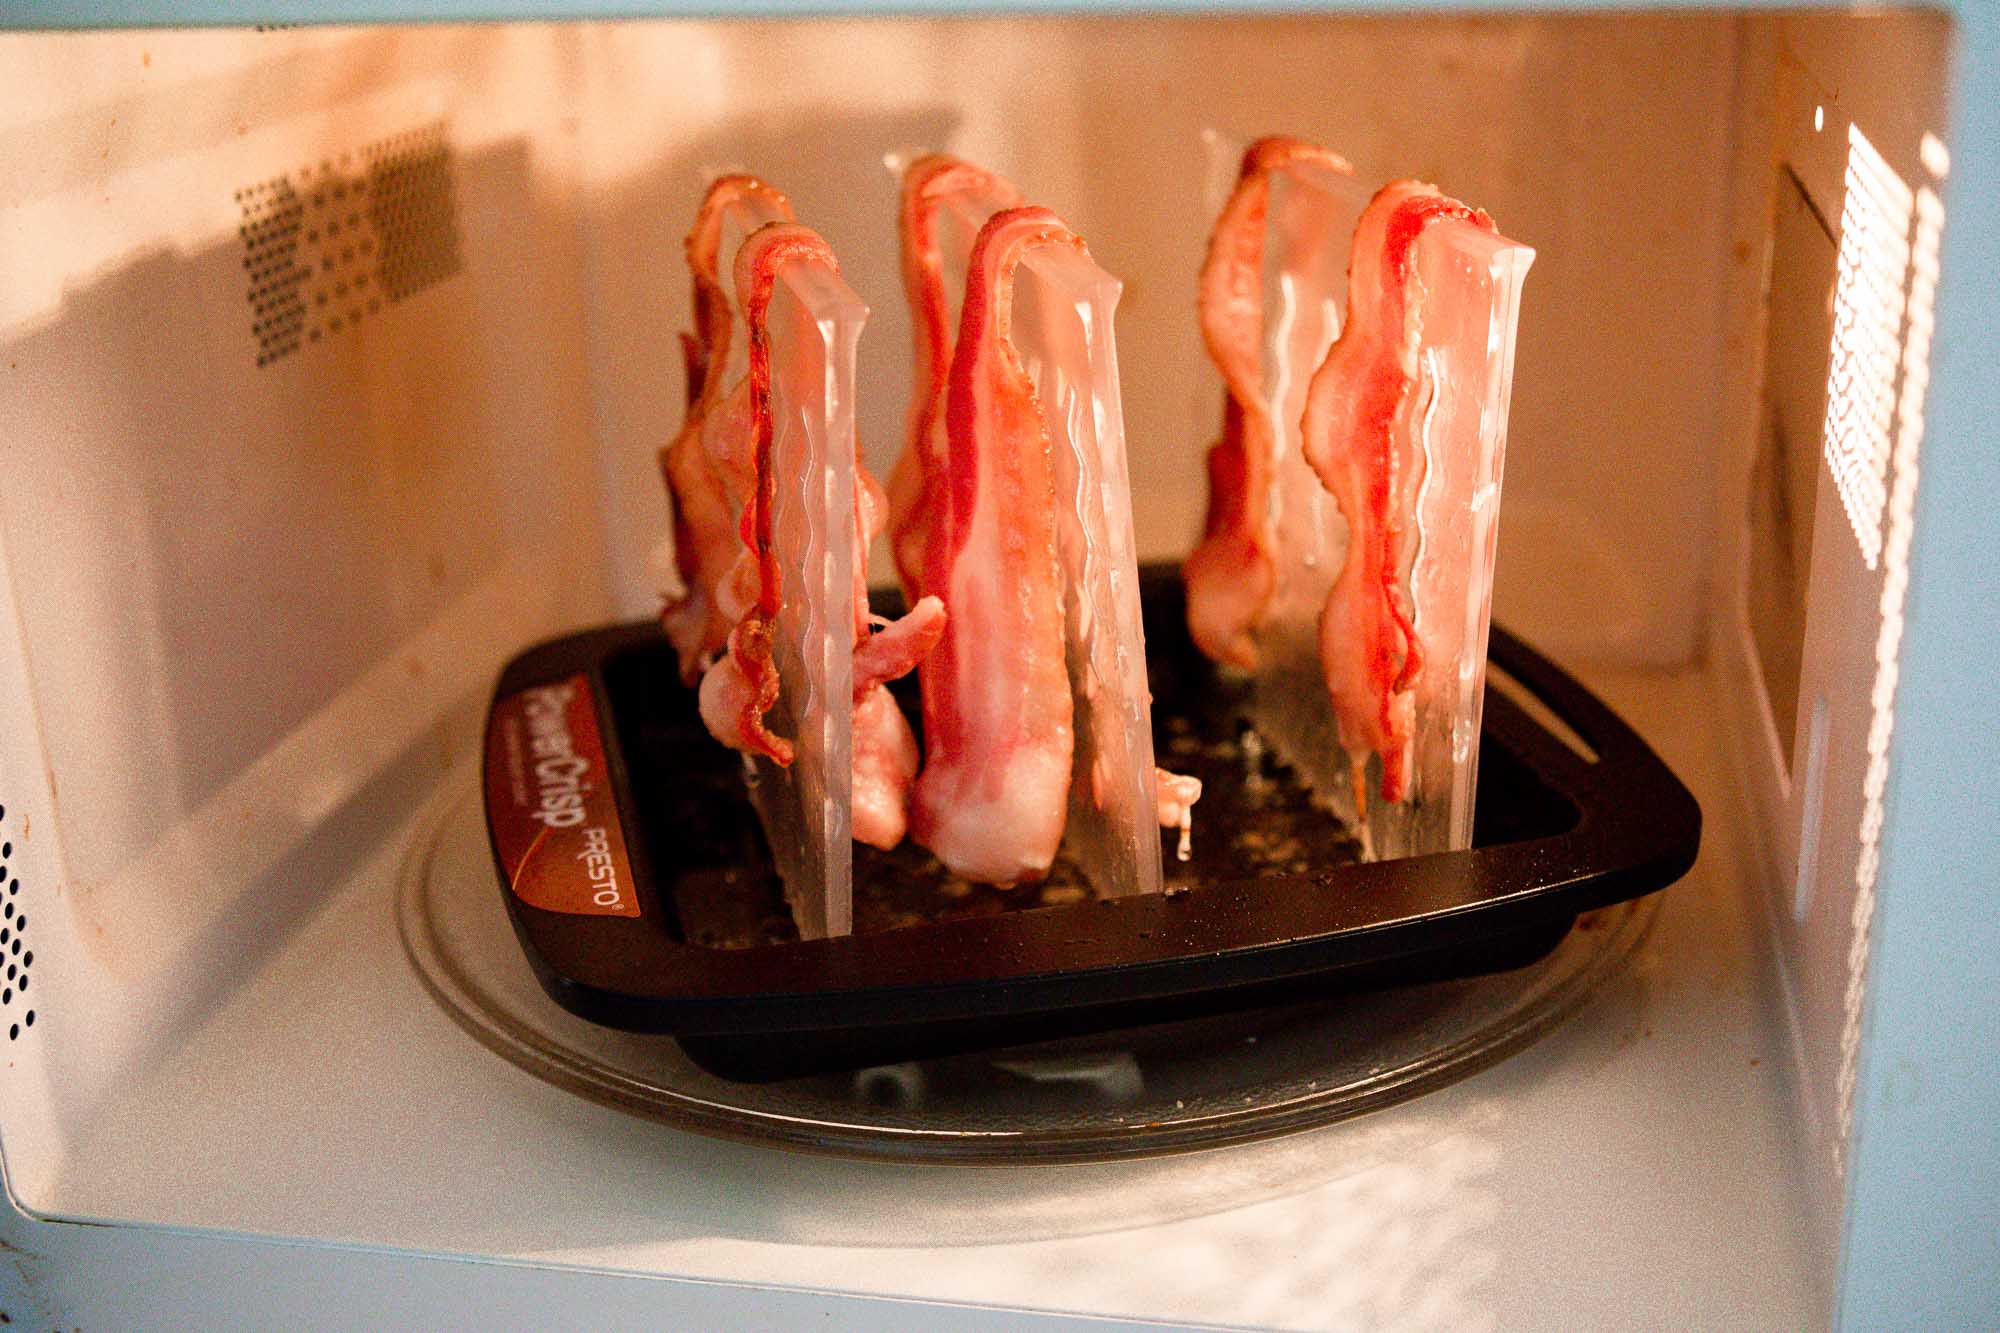 Household Cooking Microwave Bacon Cooker Shelf Rack High Temperature  Resistance